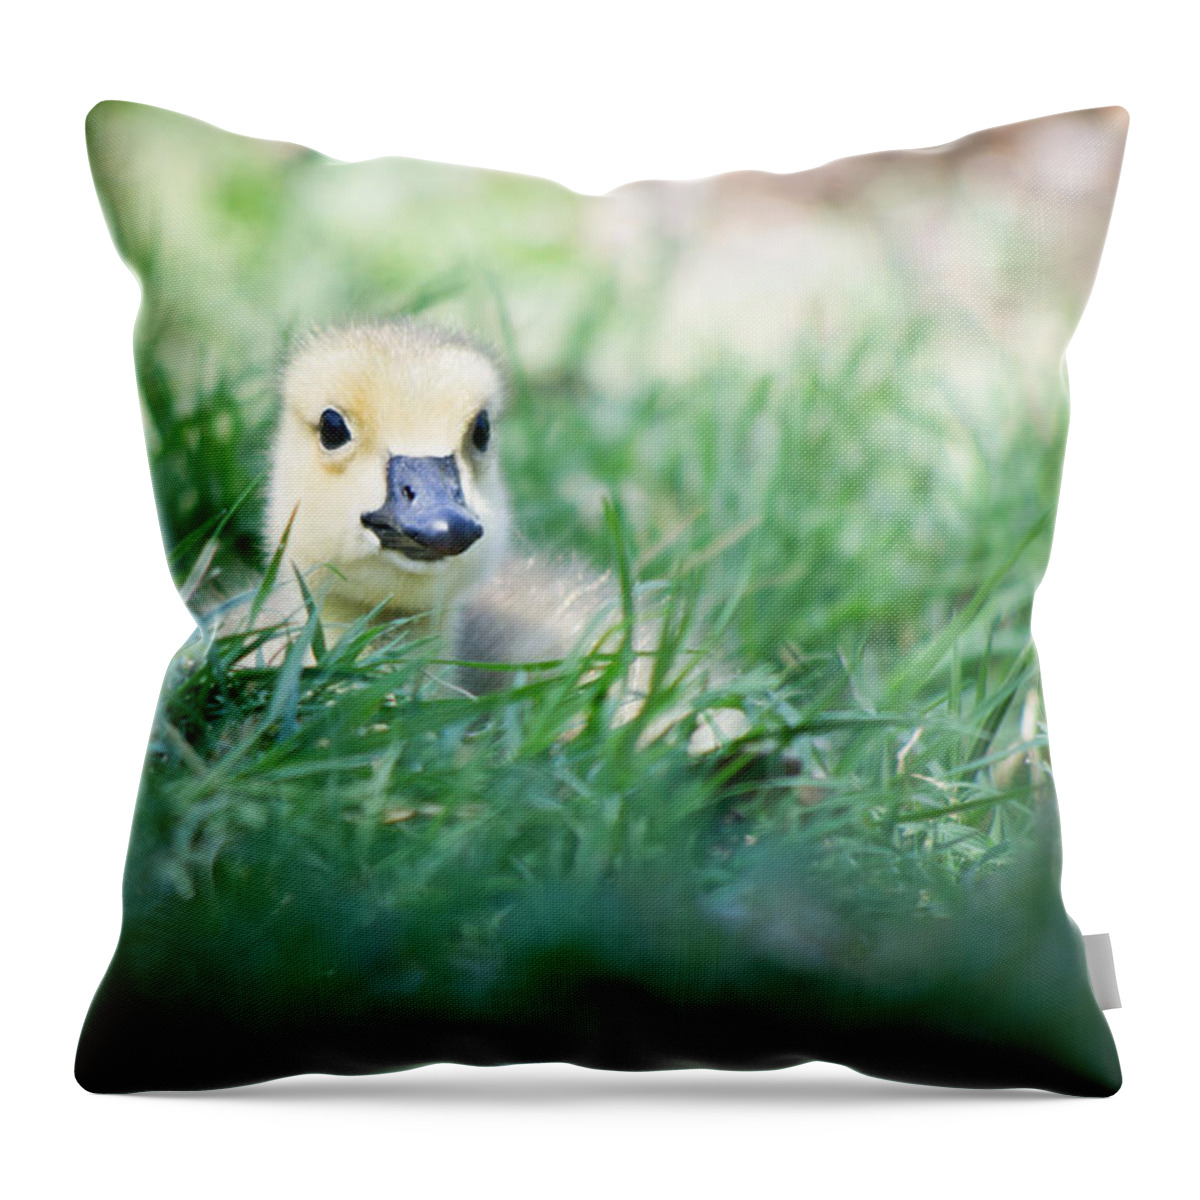 Bird Throw Pillow featuring the photograph In The Grass by Priya Ghose